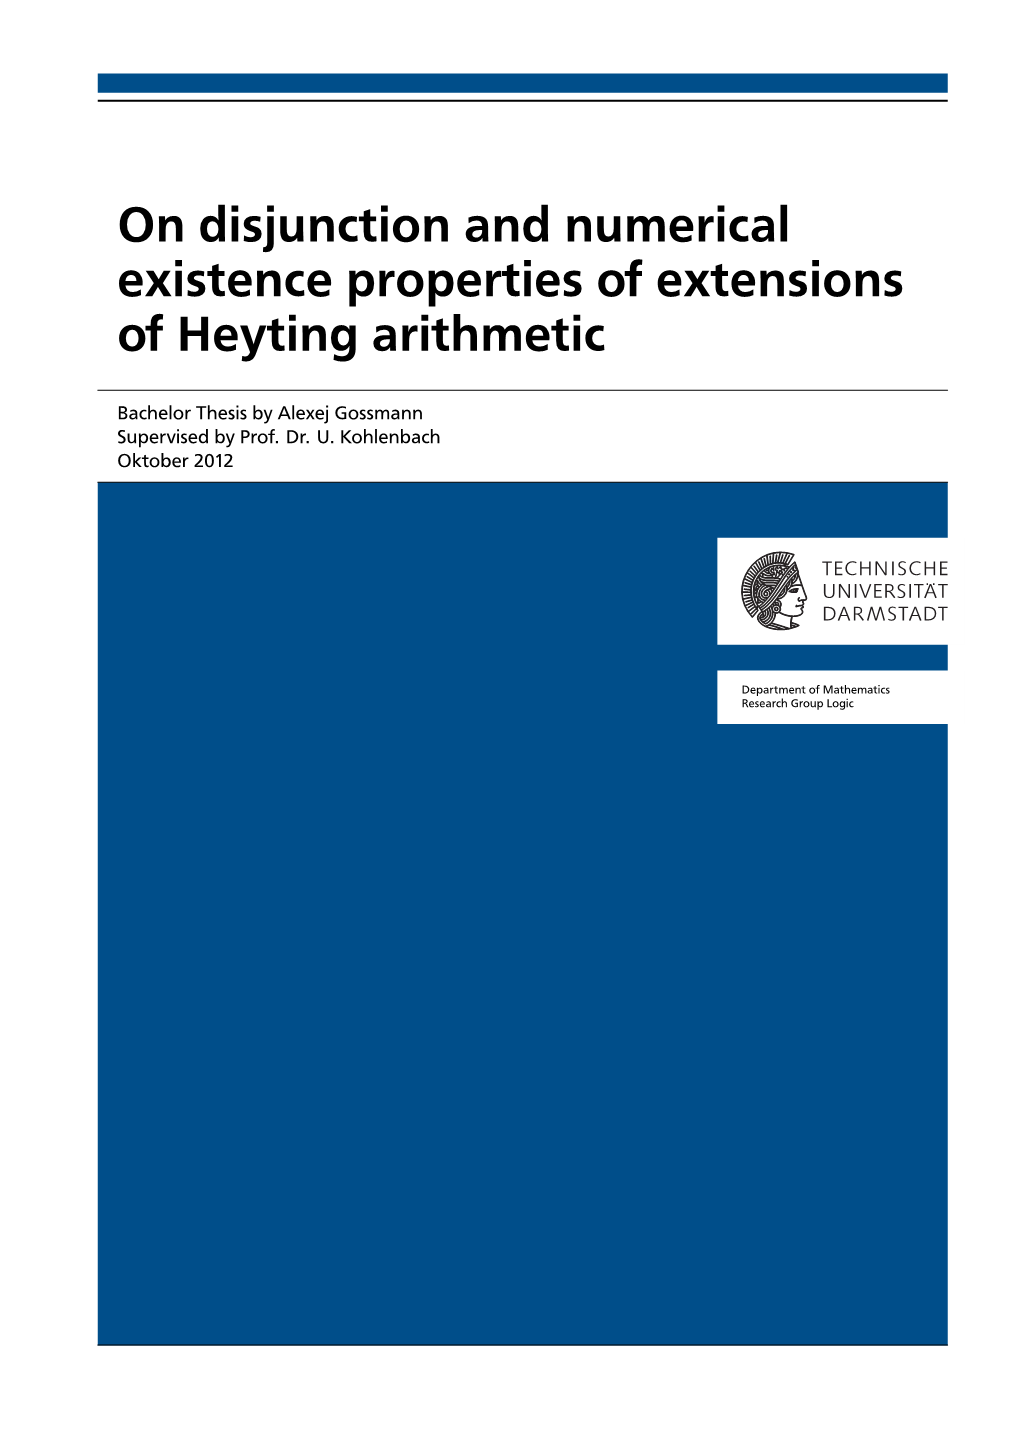 On Disjunction and Numerical Existence Properties of Extensions of Heyting Arithmetic